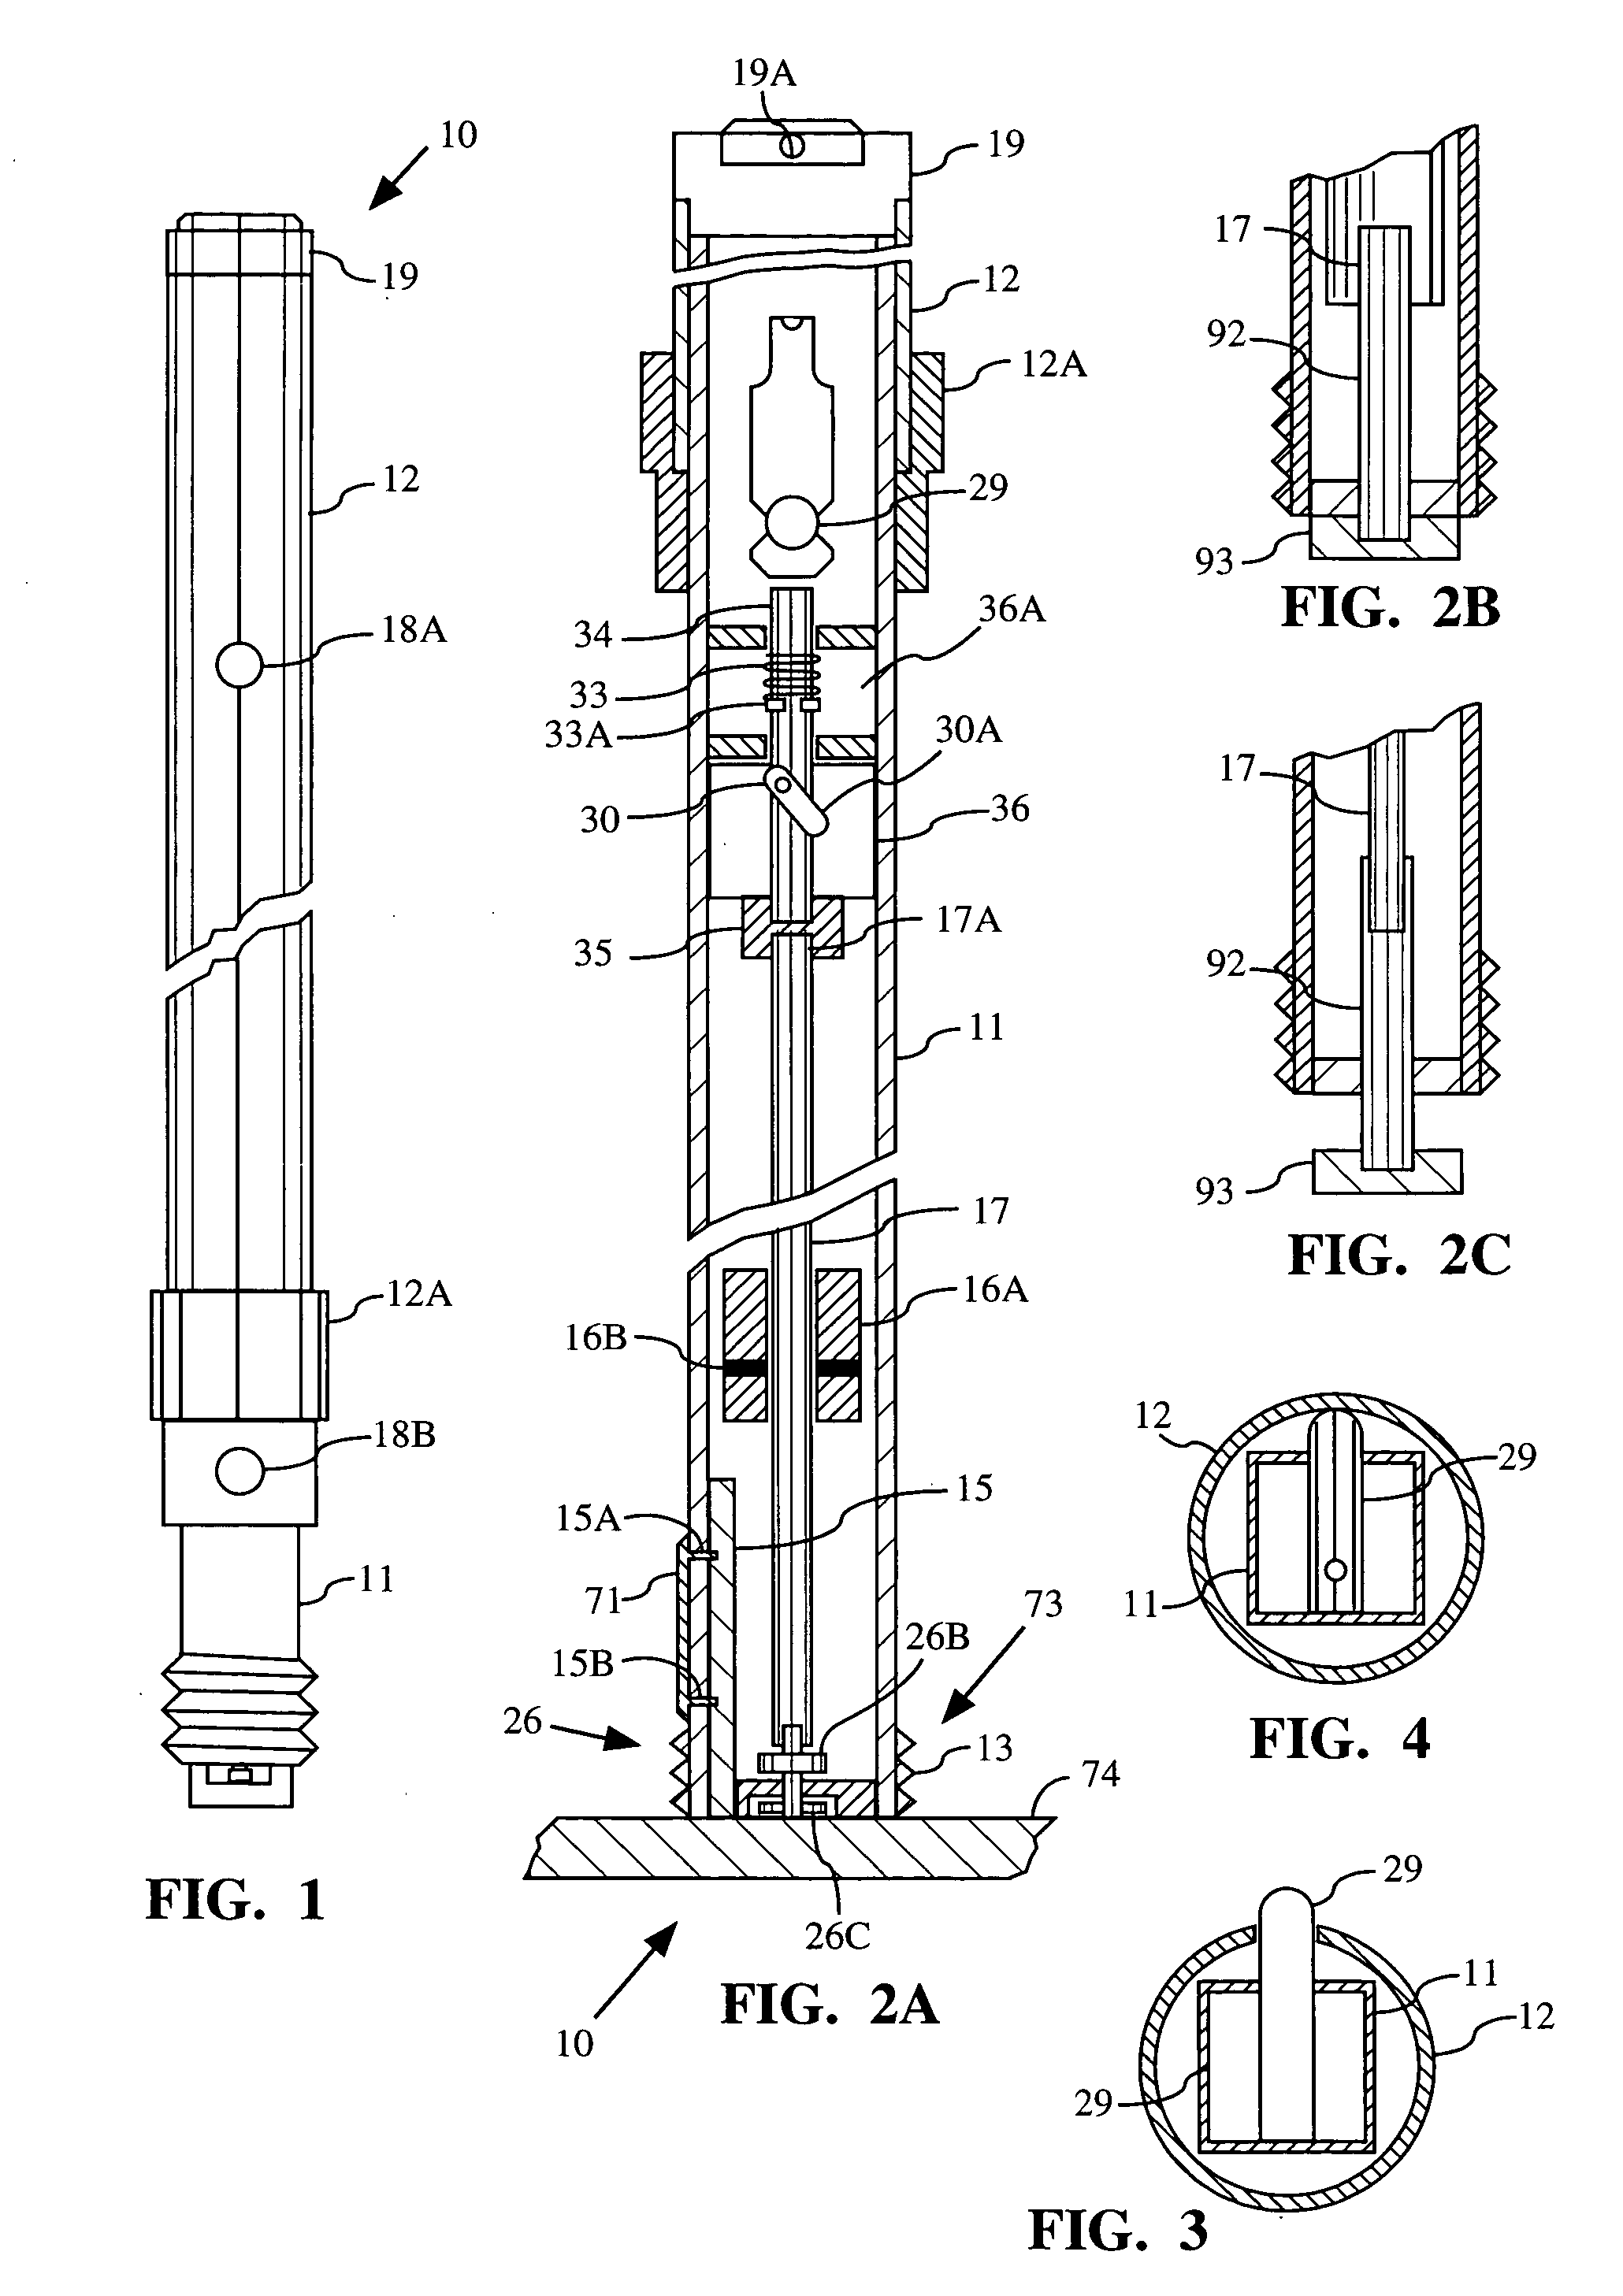 Collapsible liquid level measurement device with attachments